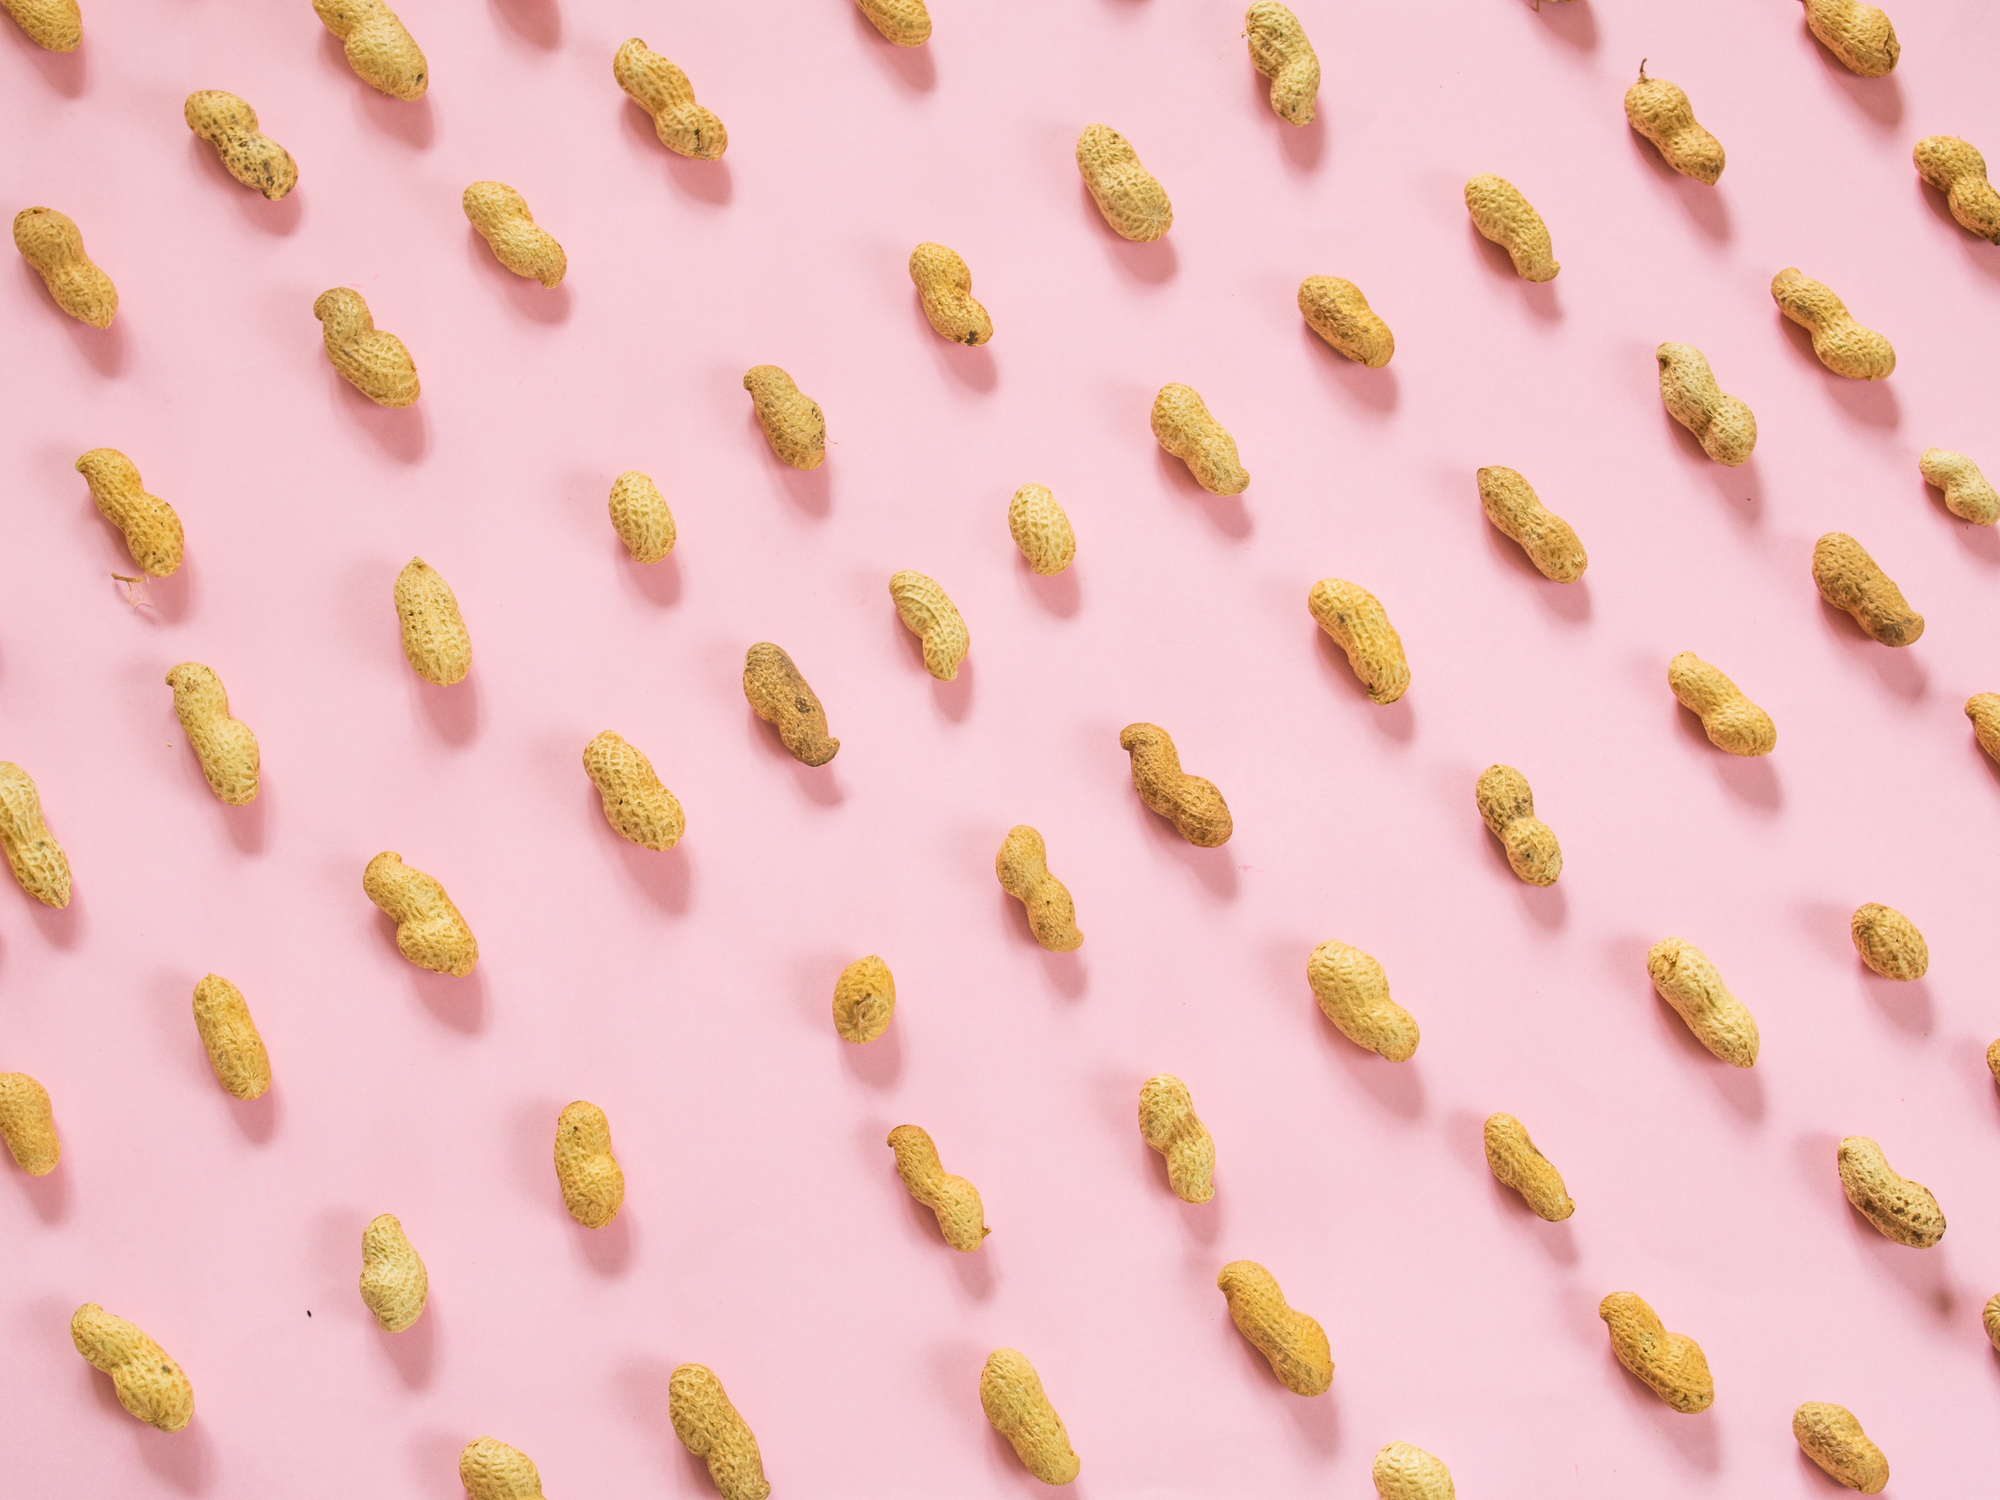 High Angle View Of Peanuts Over Pink Background